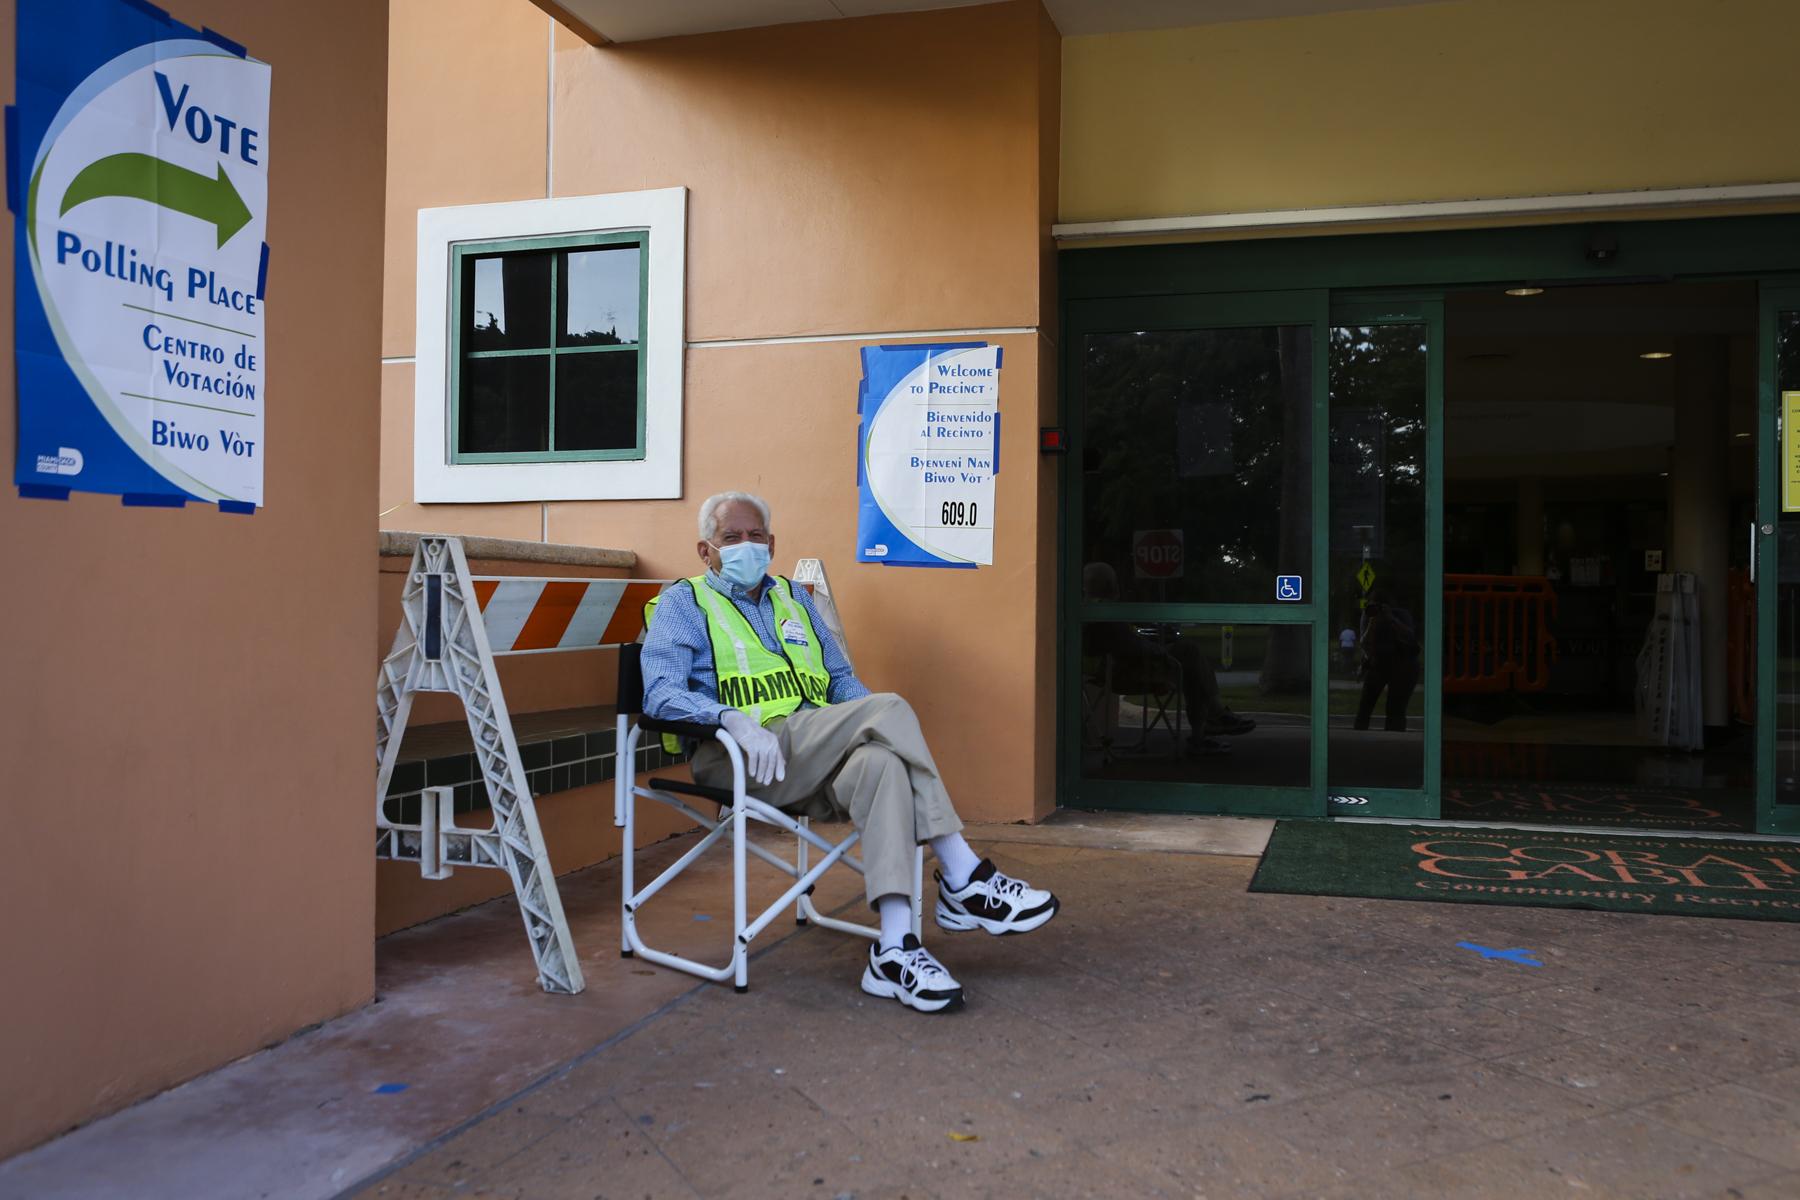 Election 2020 @ Miami, FL - A poll worker waits for voters to come to cast their...